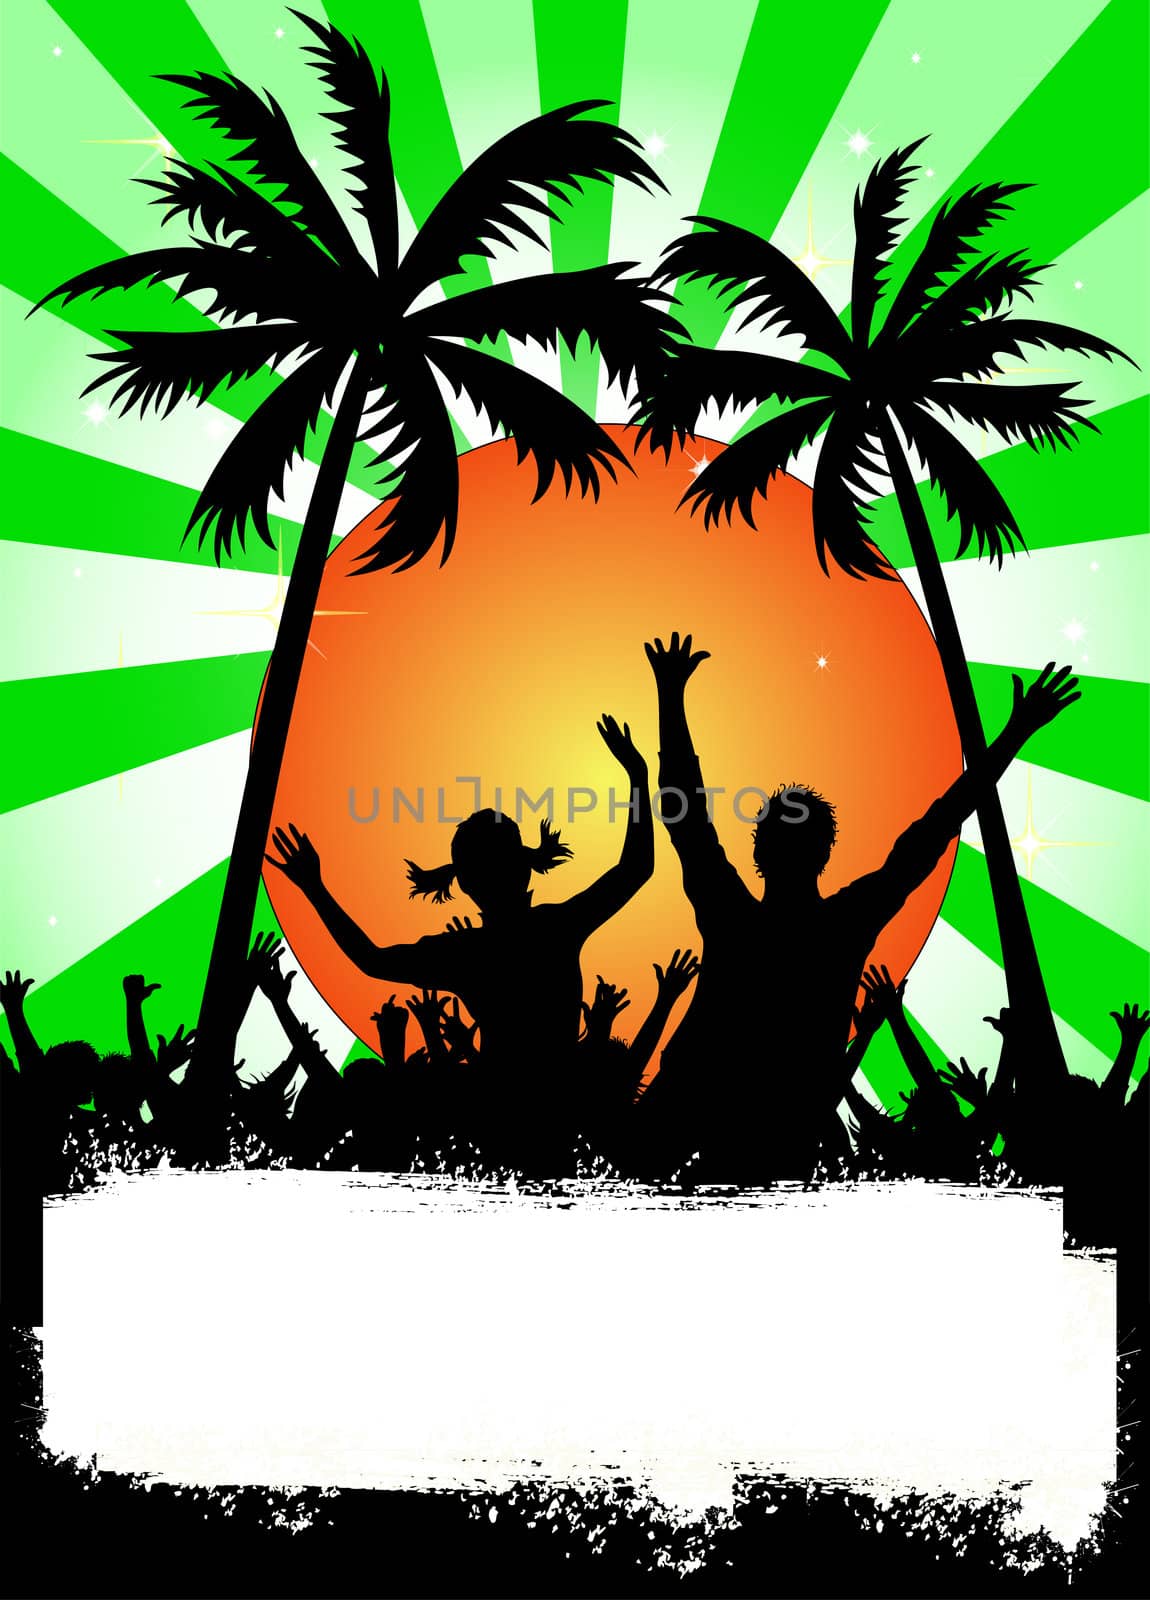 illustration of a green party placard with palms